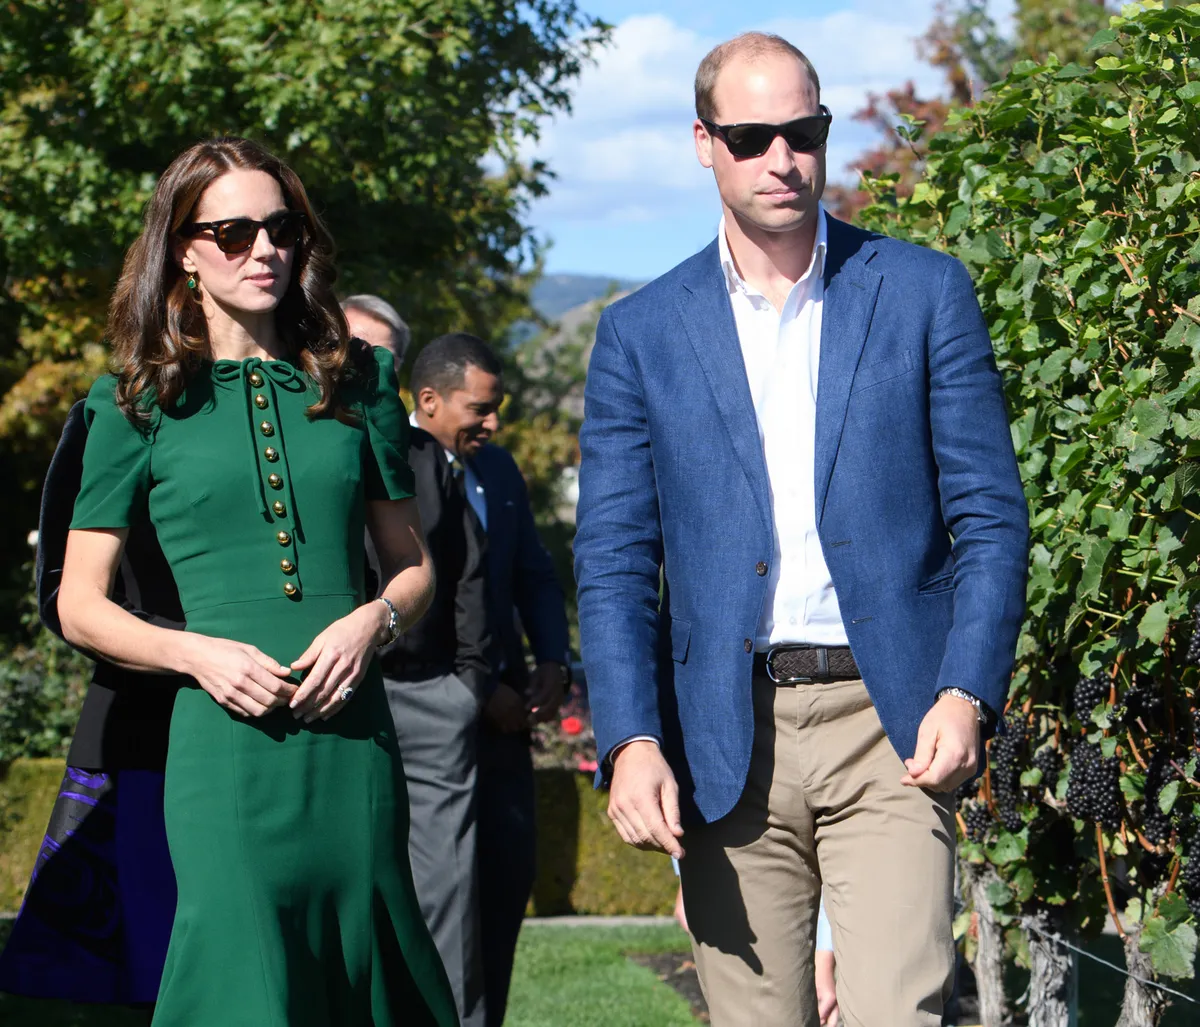 Prince William and Duchess Kate walk through Mission Hill Winery in Canada.